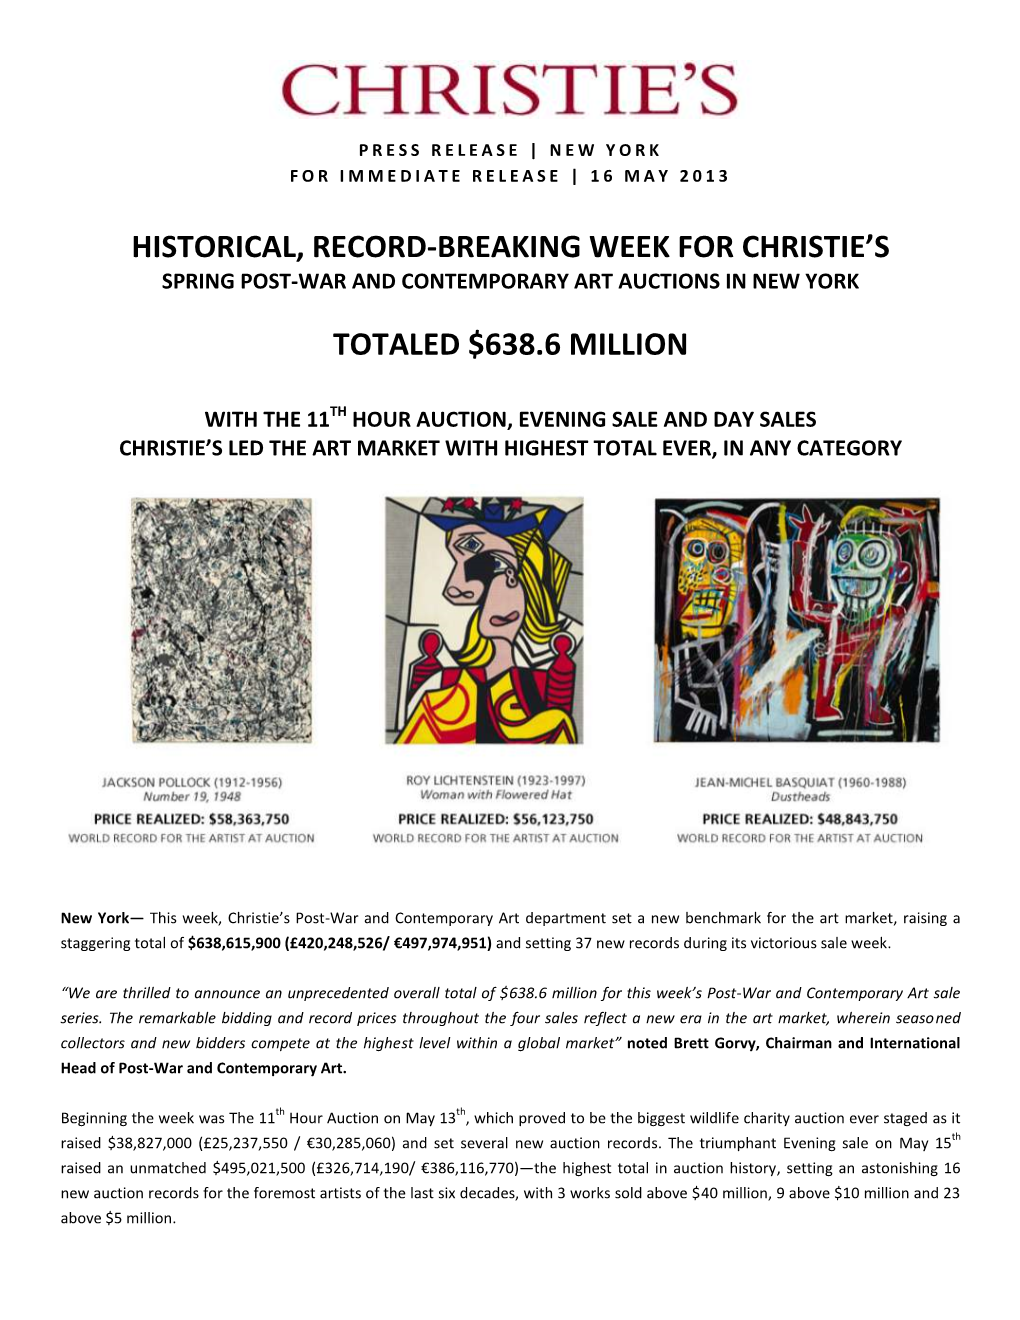 Historical, Record-Breaking Week for Christie's Totaled